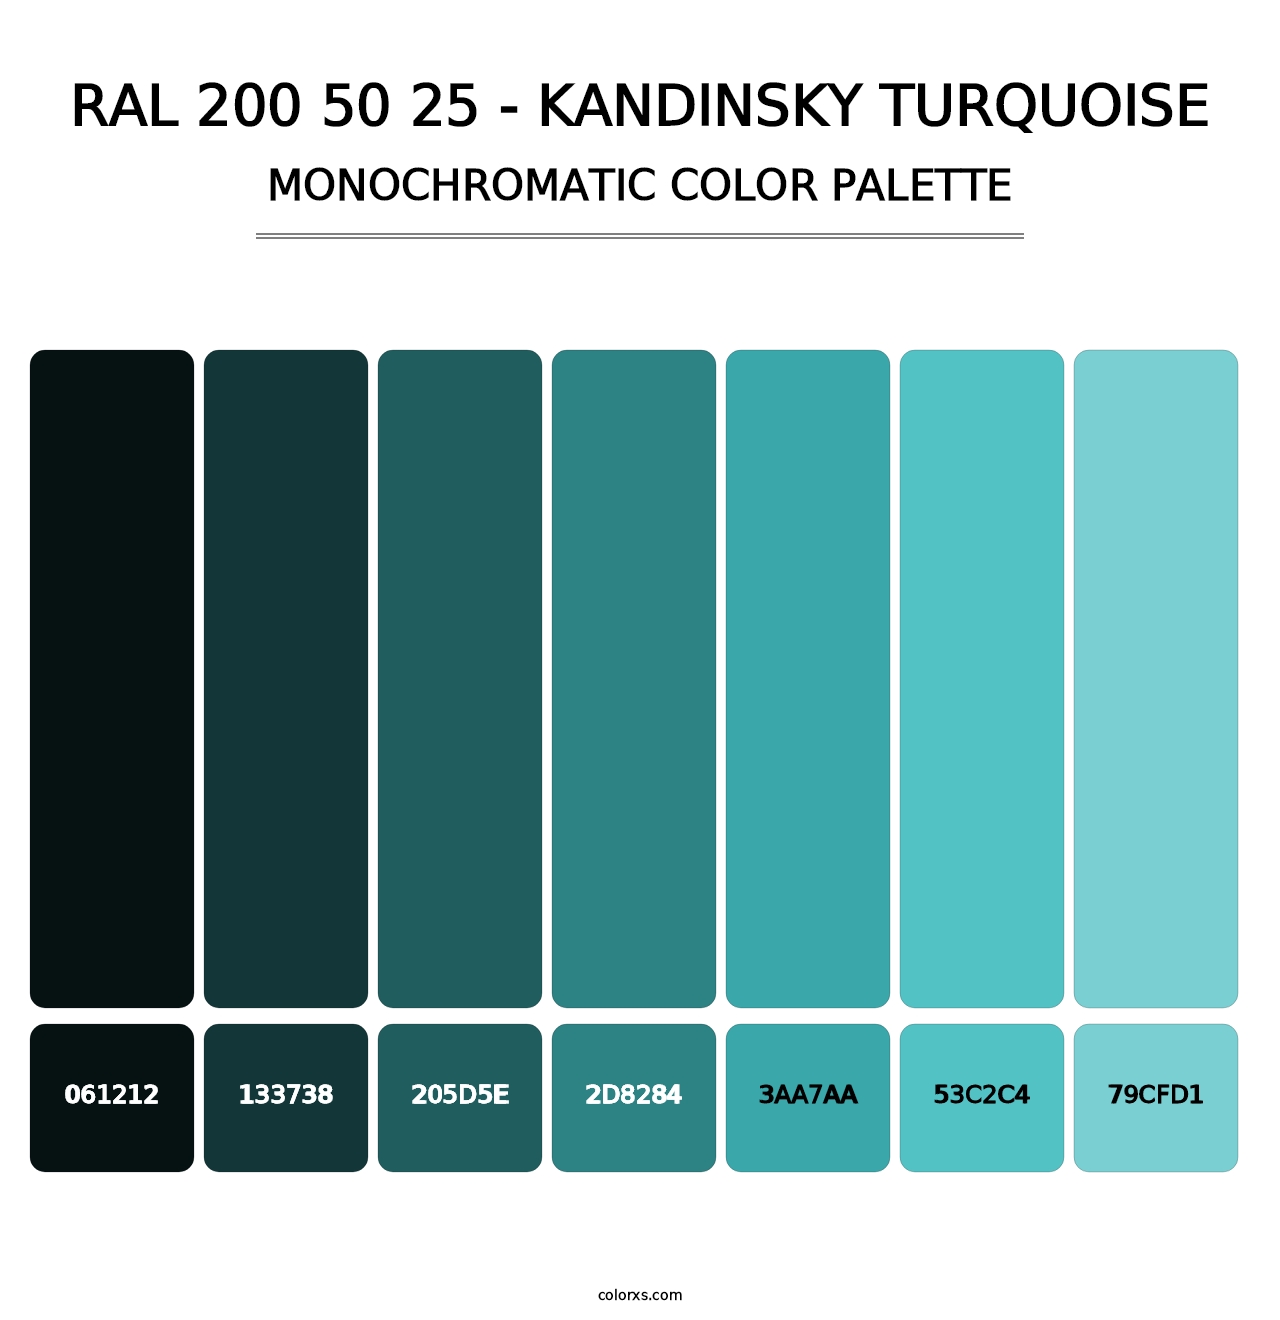 RAL 200 50 25 - Kandinsky Turquoise - Monochromatic Color Palette